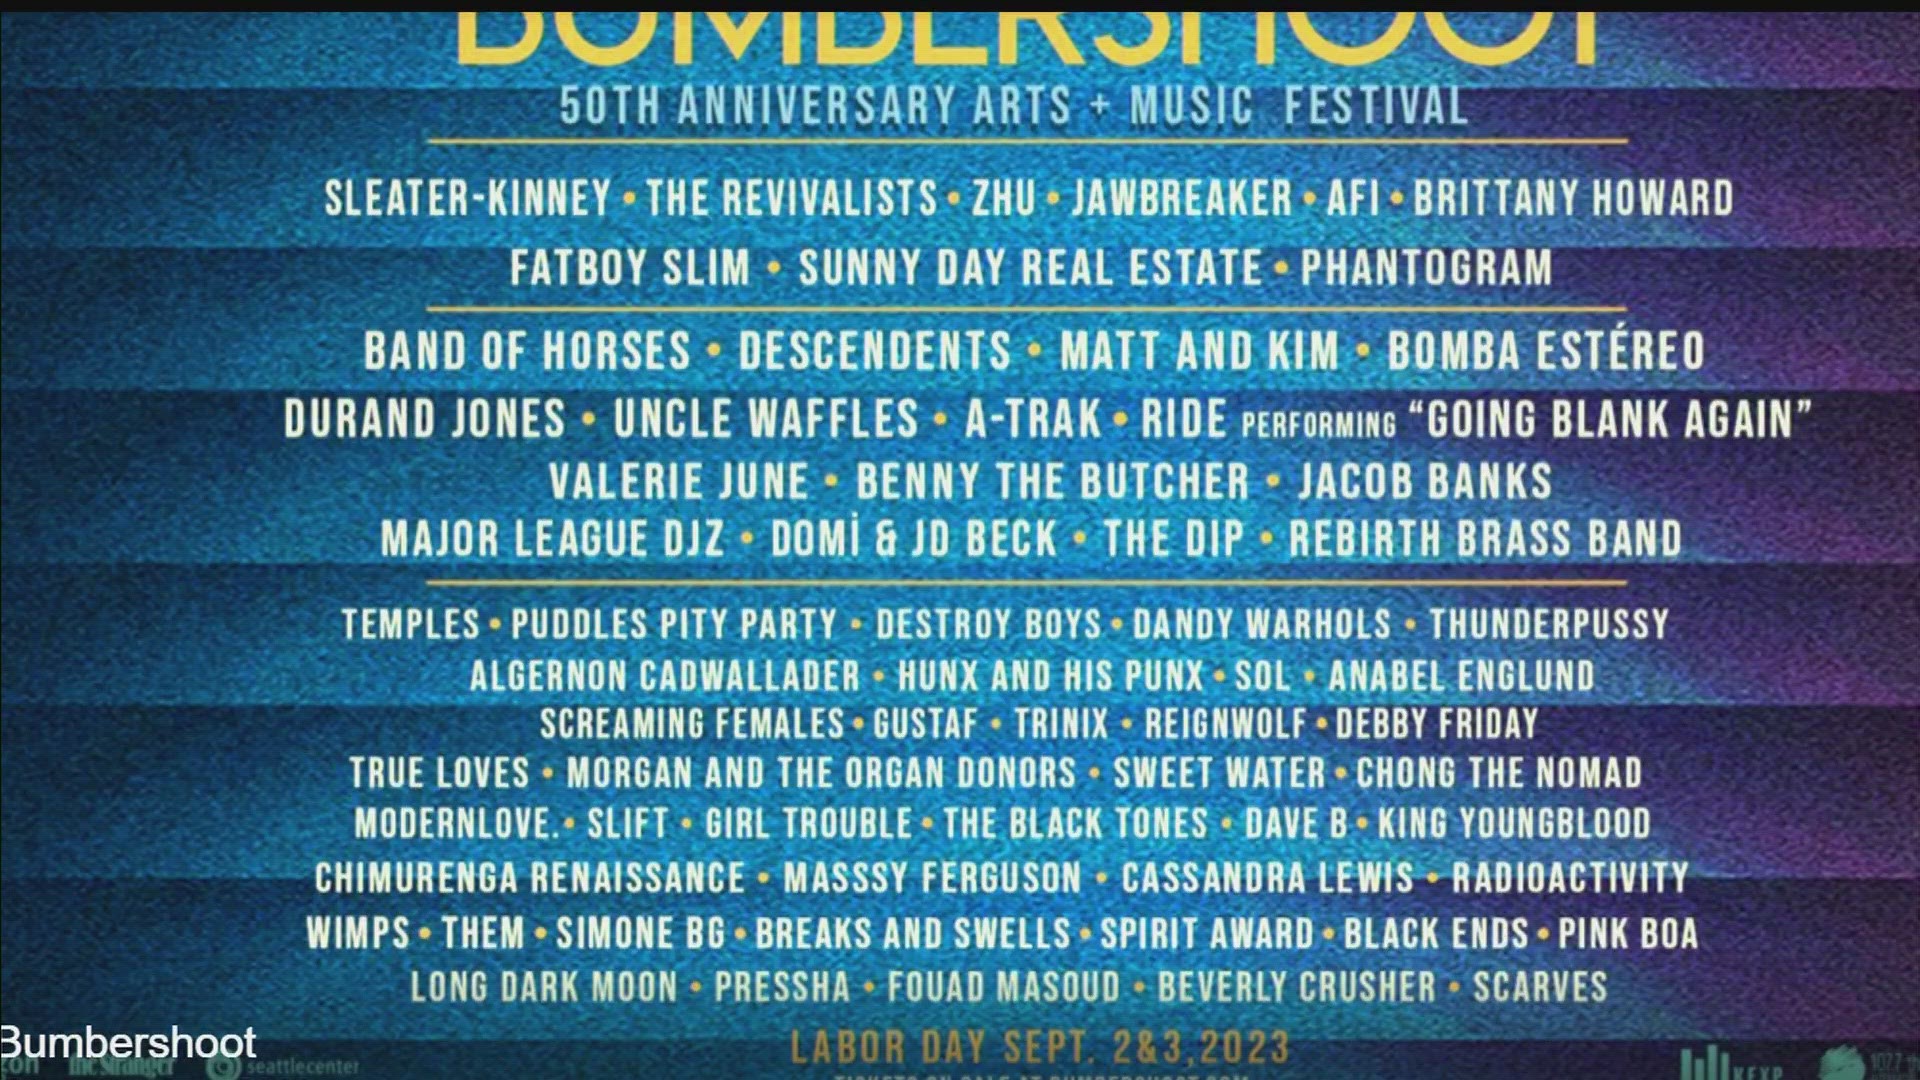 Who's playing at Bumbershoot this year? Lineup released